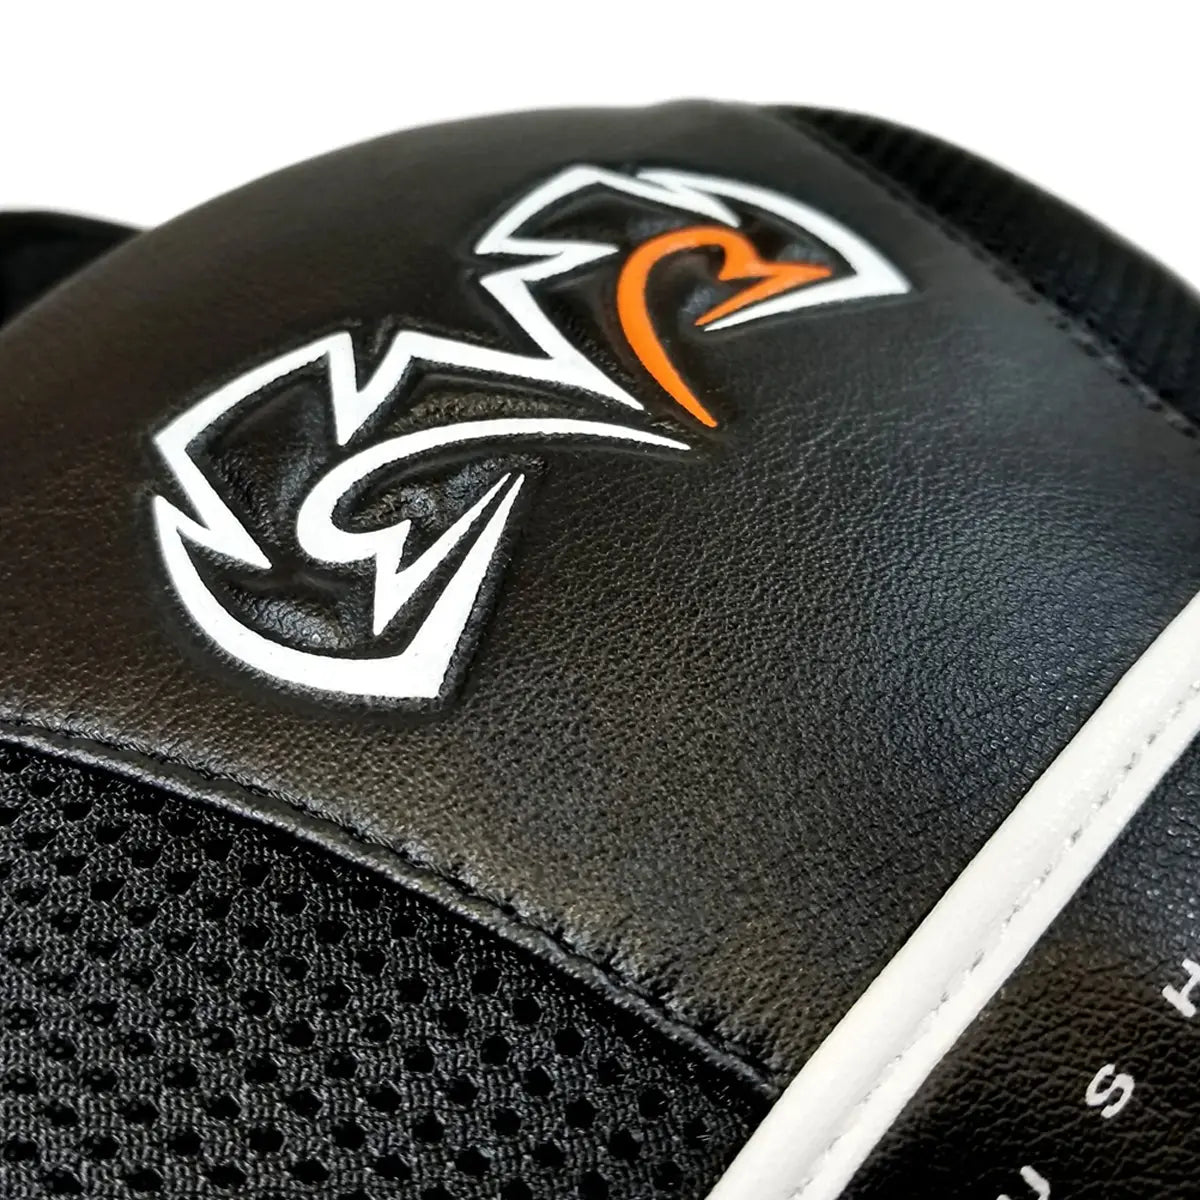 Rival Boxing RPM3 Air Punch Mitts 2.0 - Black RIVAL